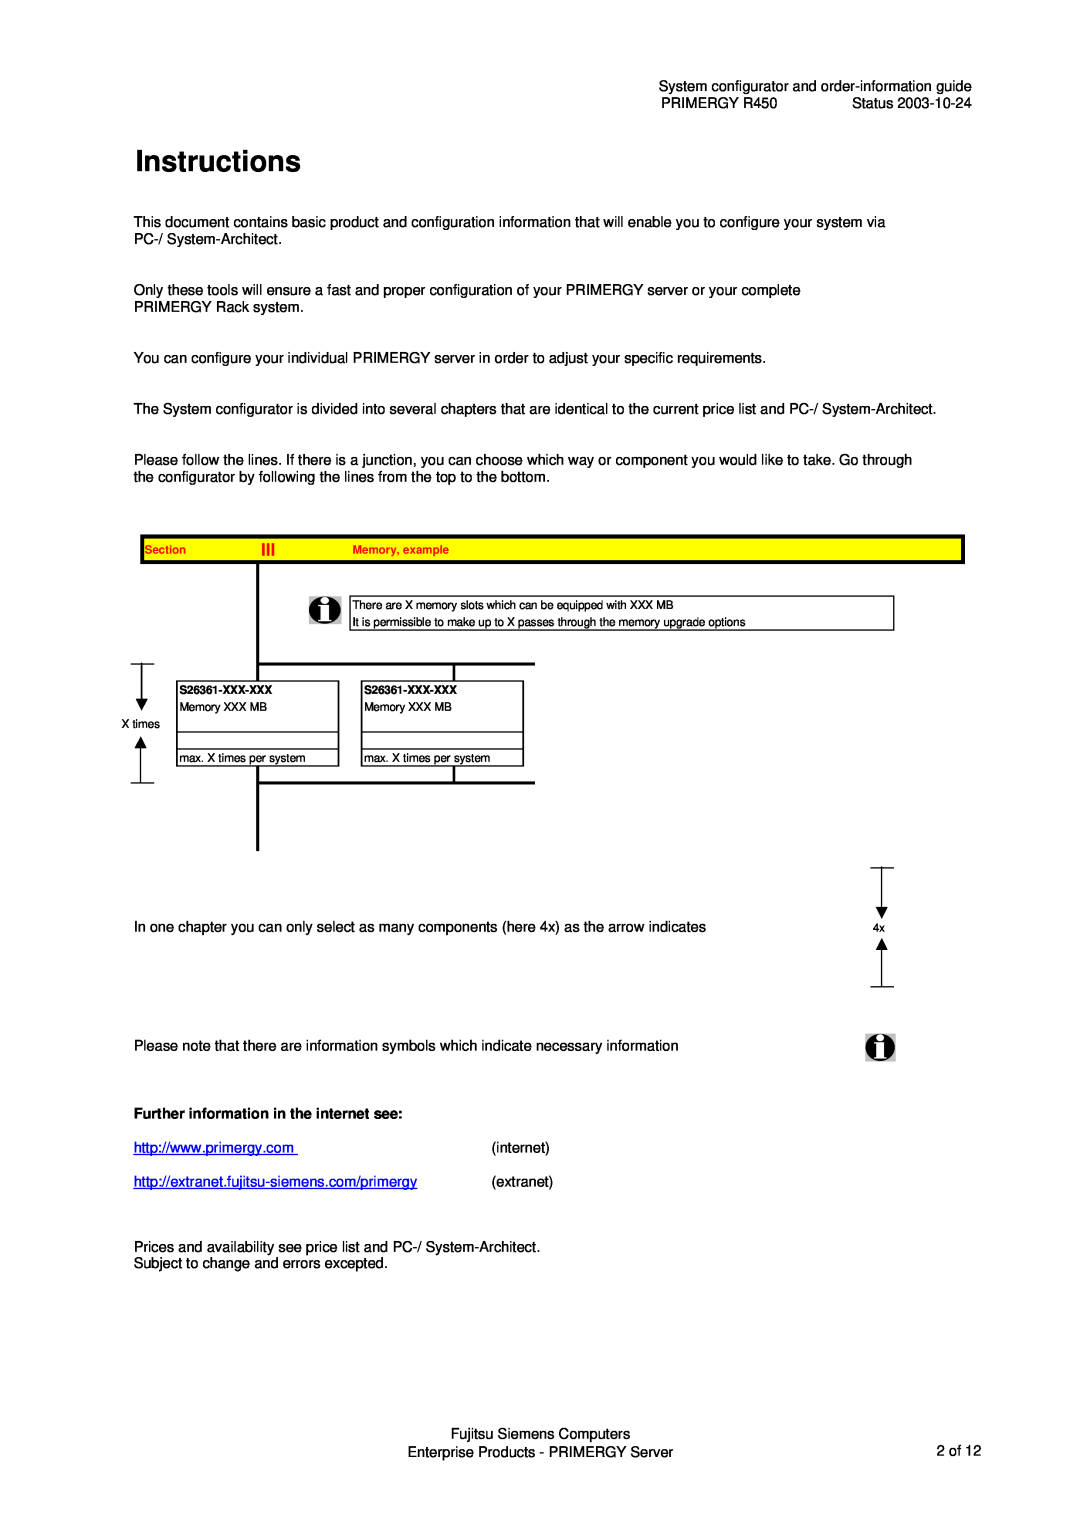 Fujitsu R450 manual Instructions, Further information in the internet see 